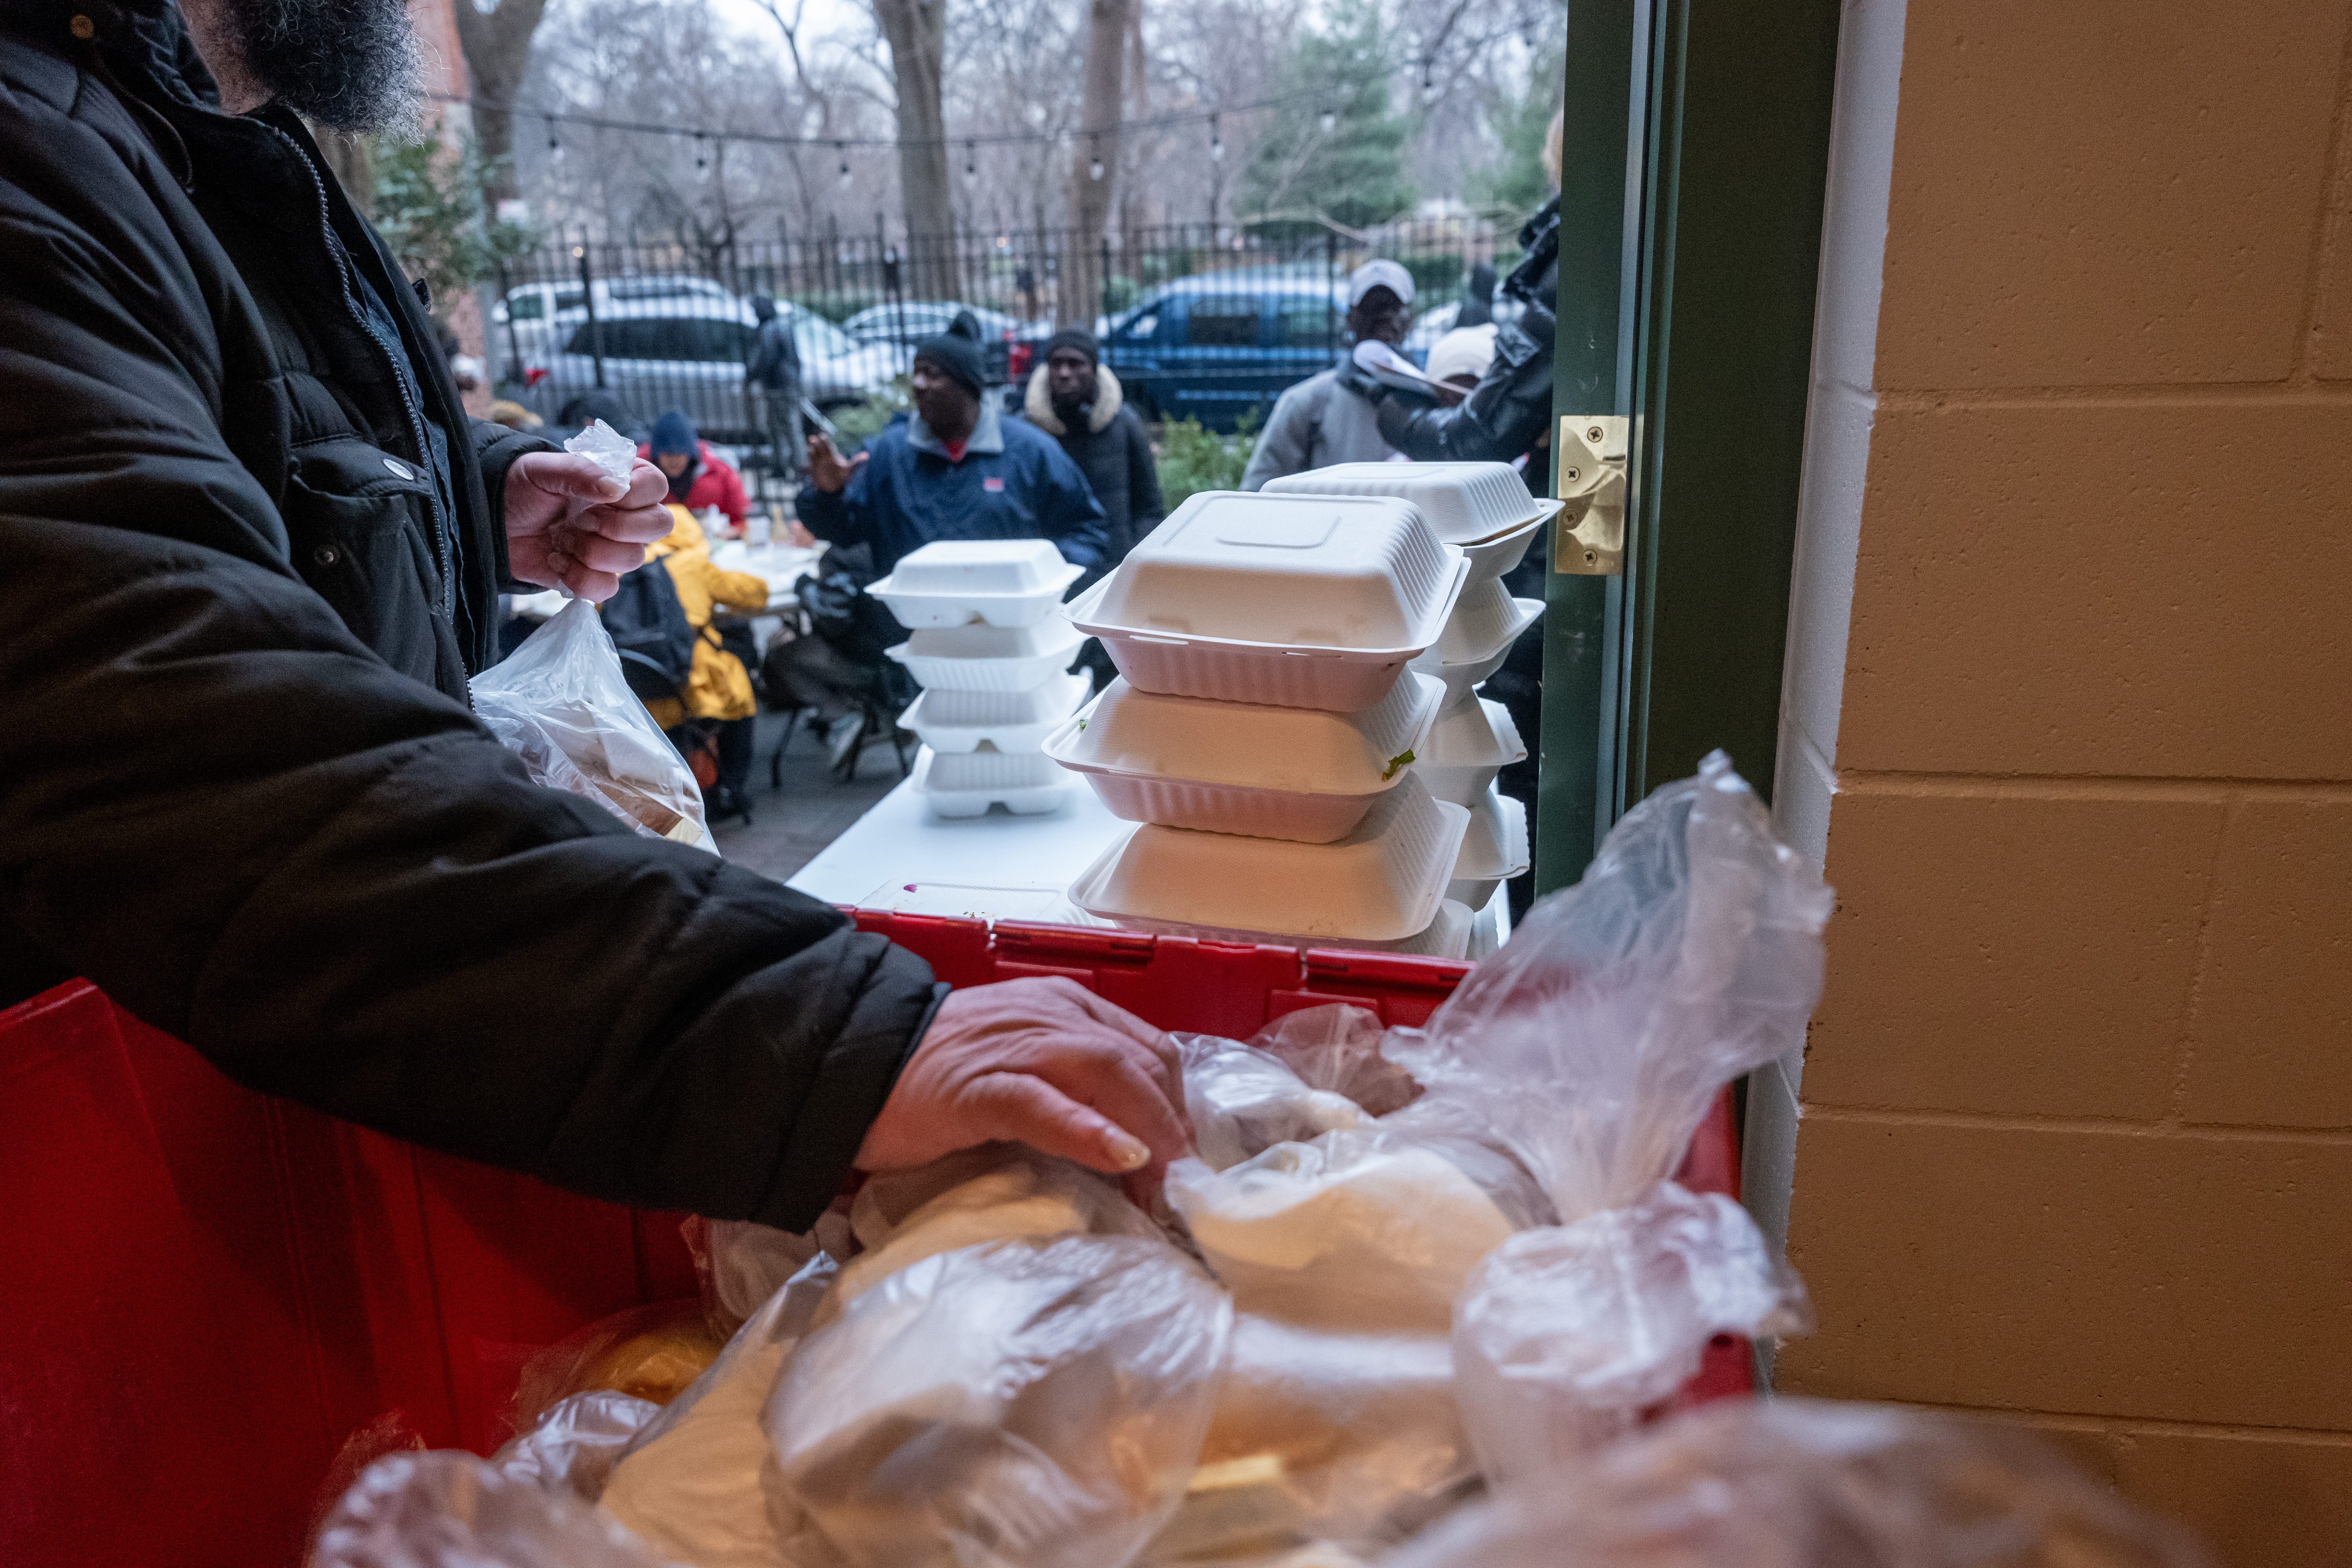 A photo of church volunteers handing out food